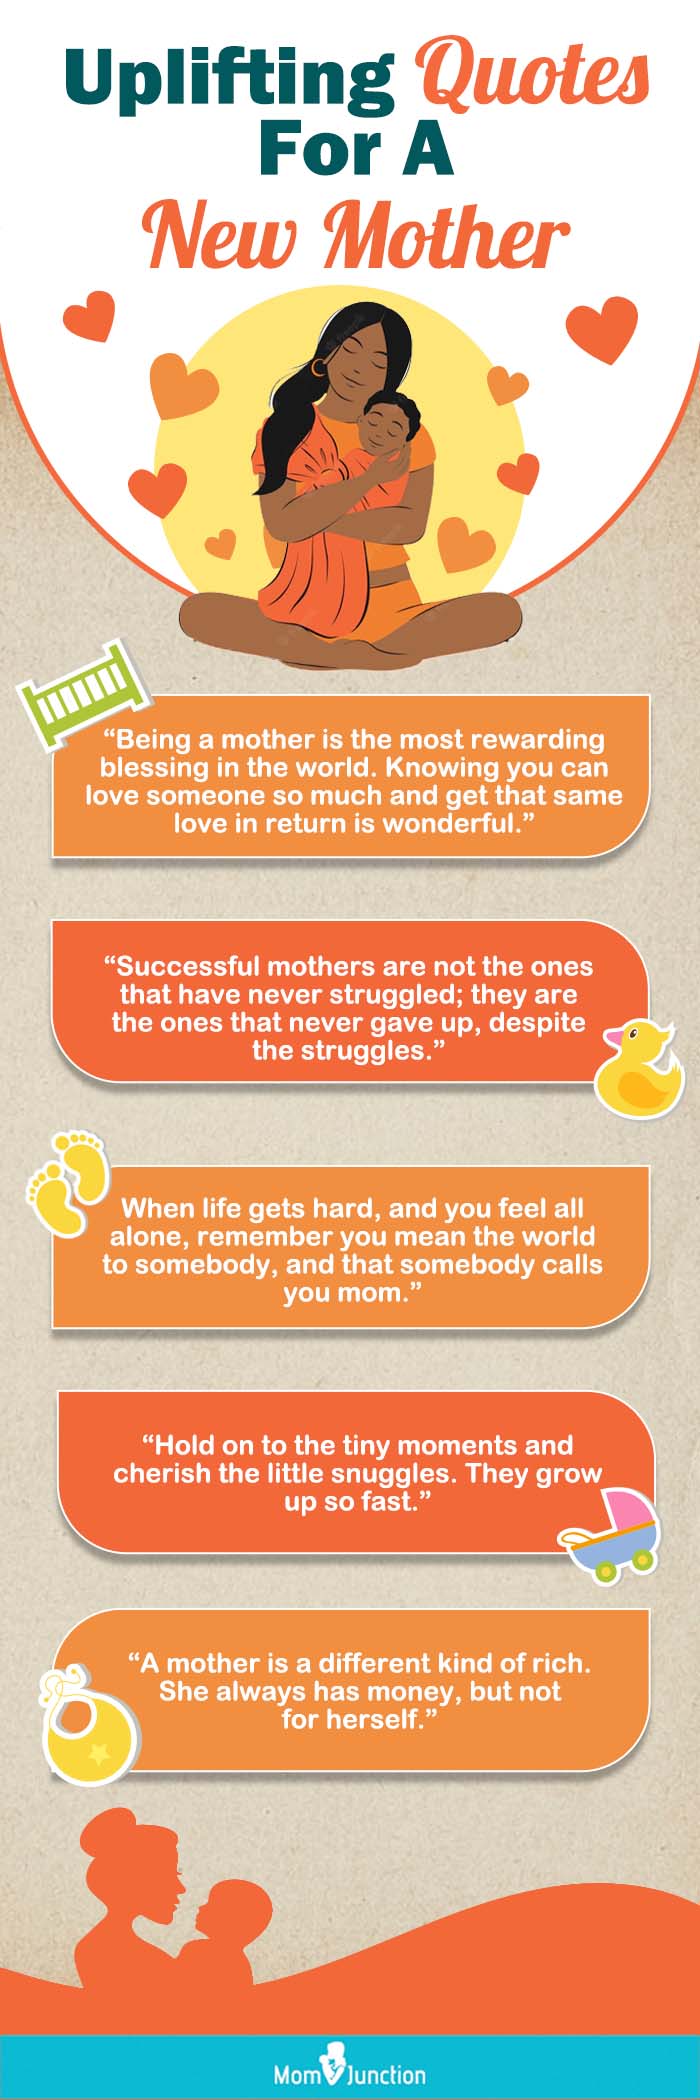 quotes for a new mom (infographic)